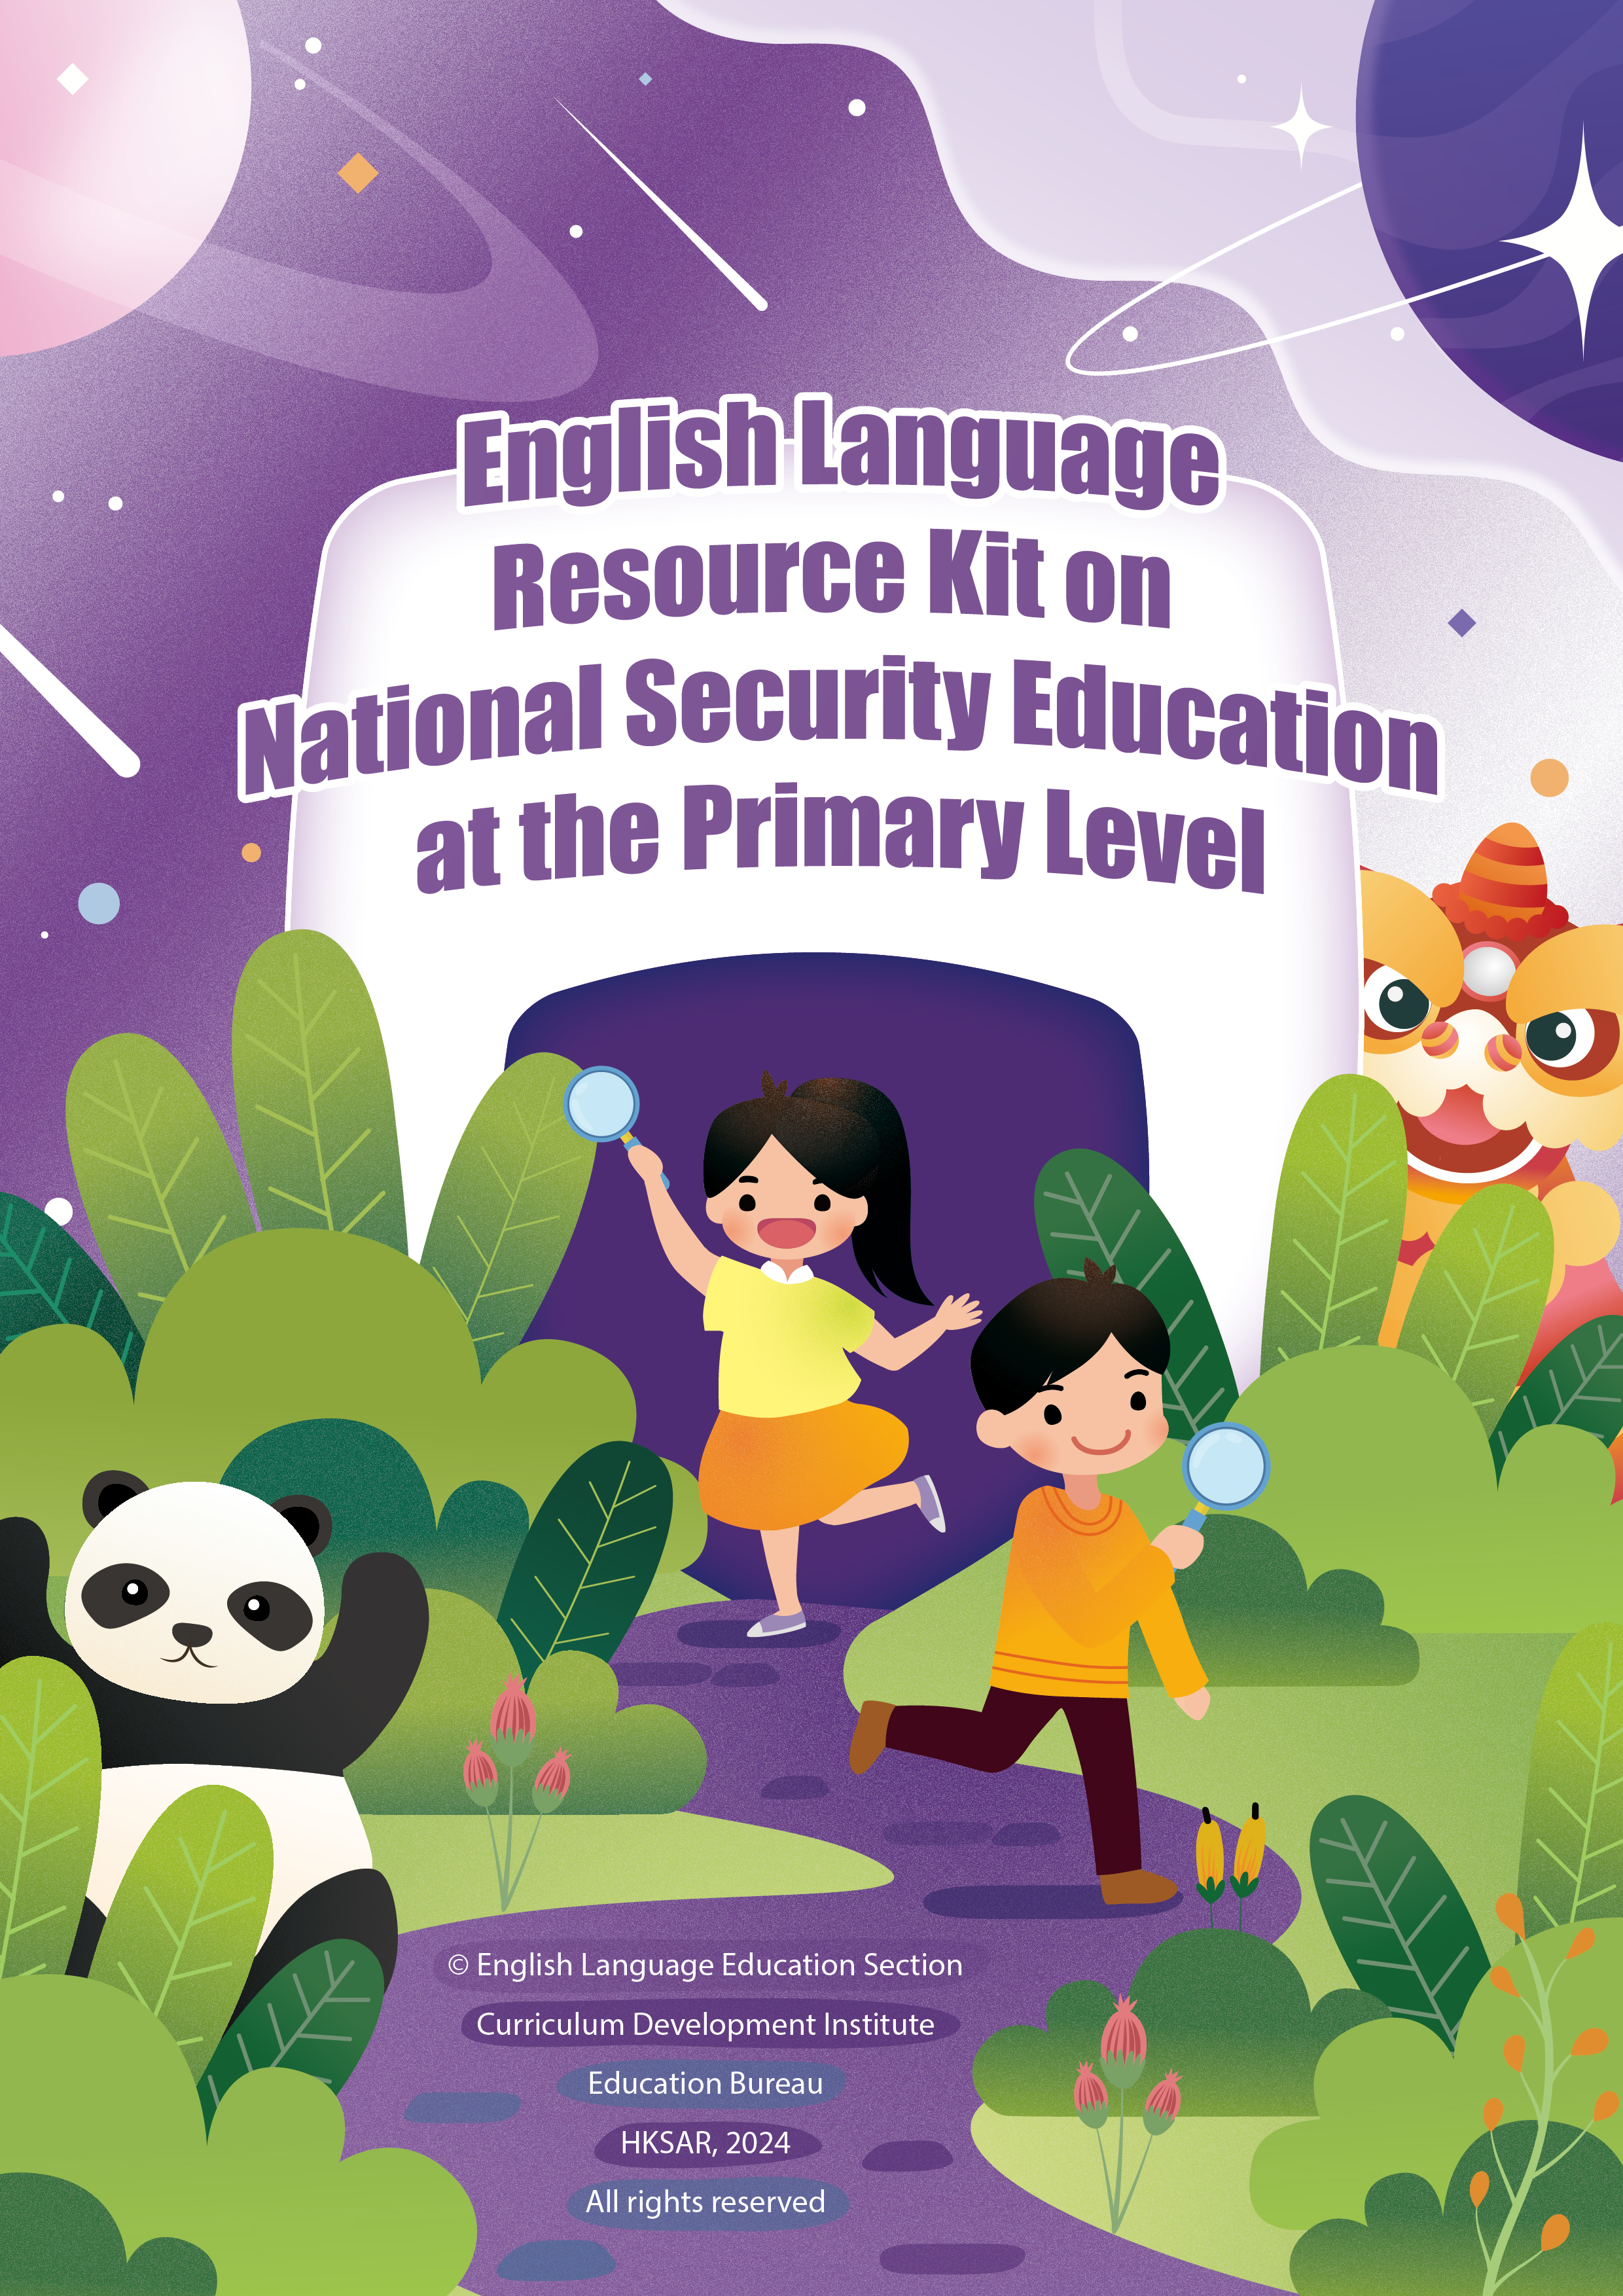 English Language Resource Kit on National Security Education at the Primary Level